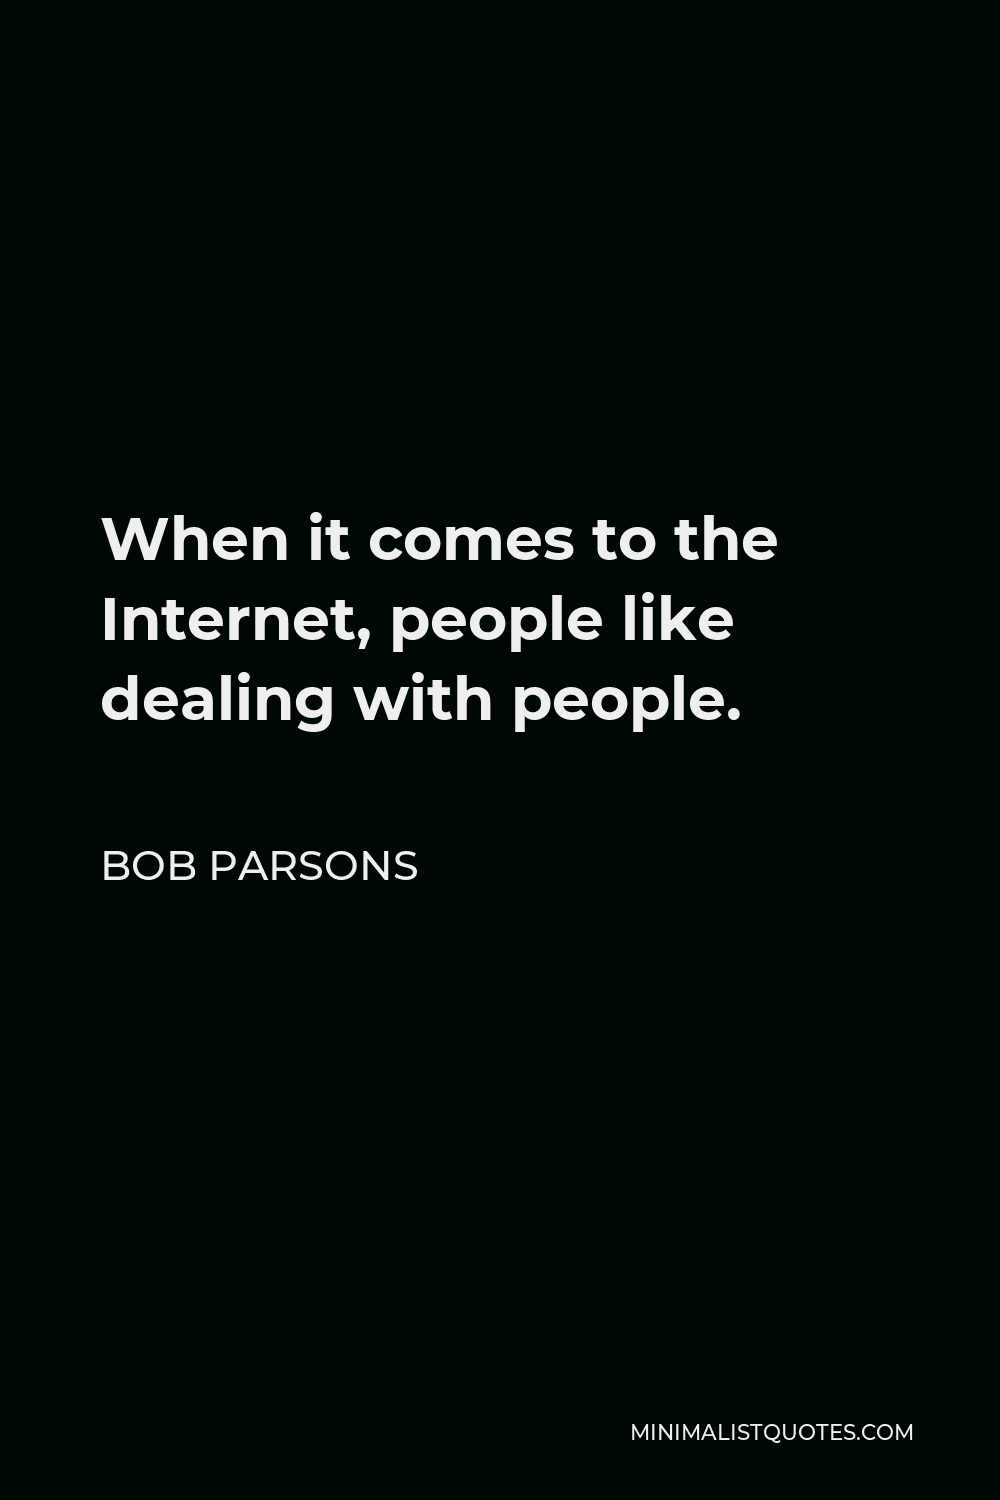 Bob Parsons Quote - When it comes to the Internet, people like dealing with people.